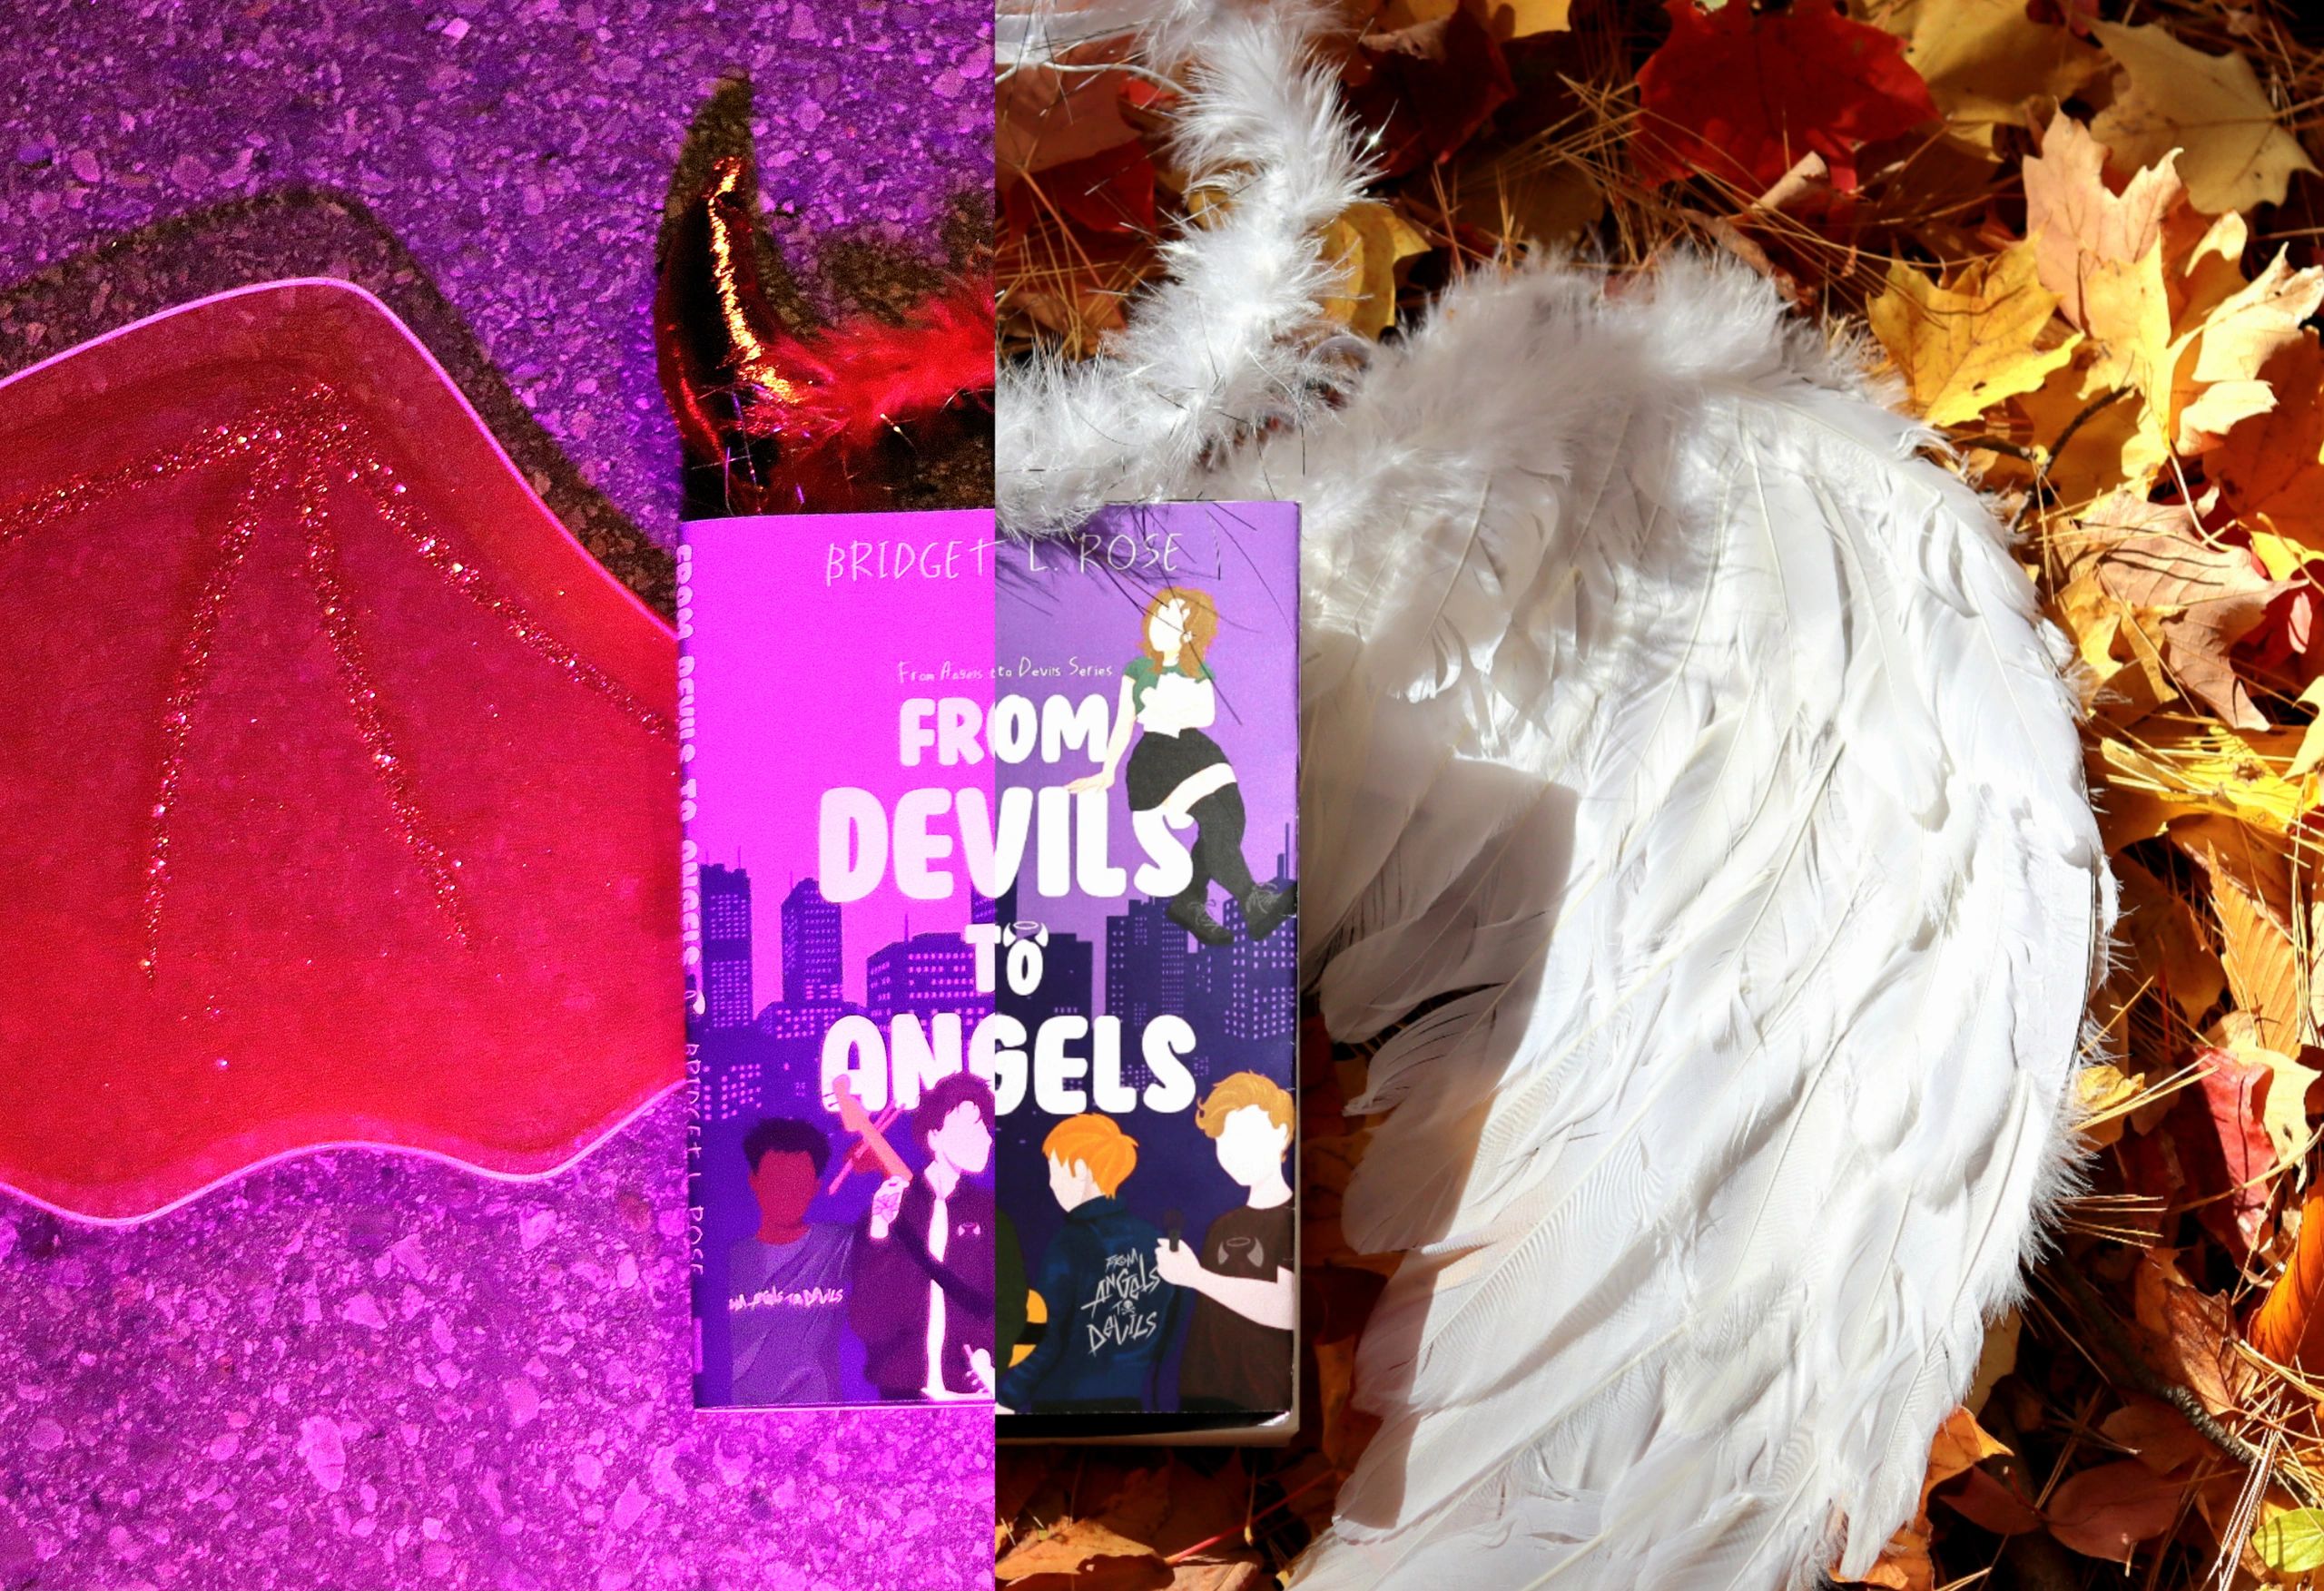 From Devils to Angels split image with half a devil theme and half an angel theme.